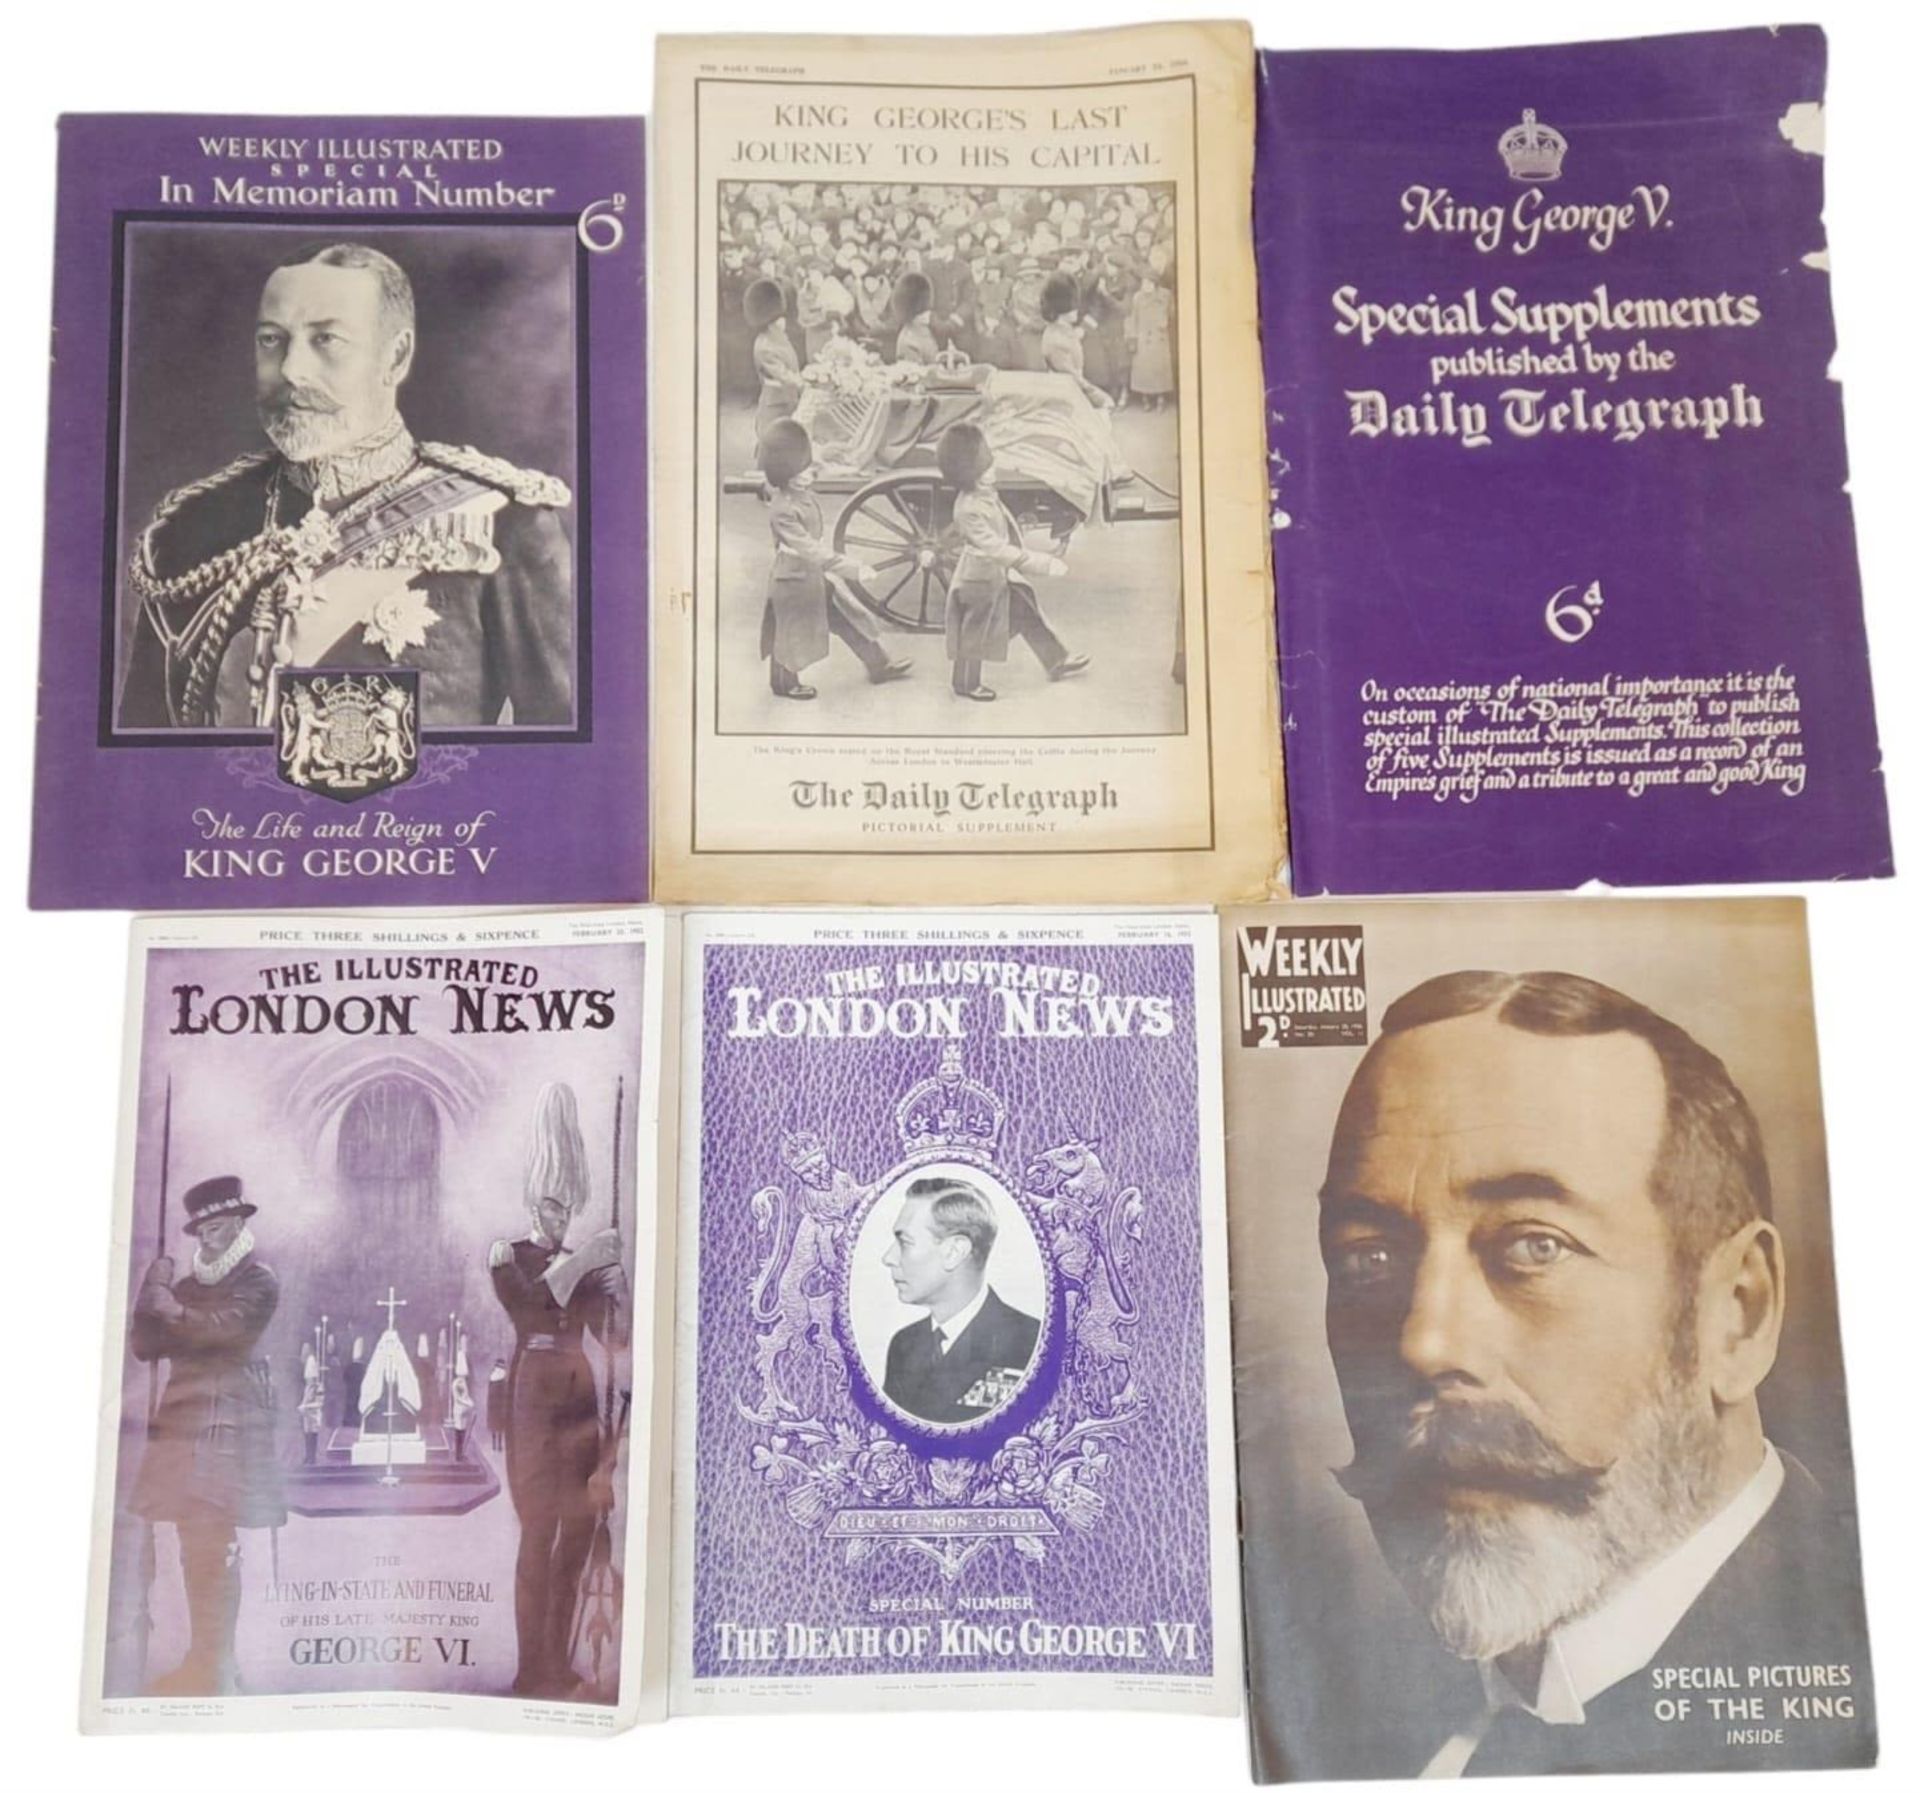 A Selection of Vintage copies of Newspapers and Magazines Marking the Deaths of King George V and - Bild 3 aus 10